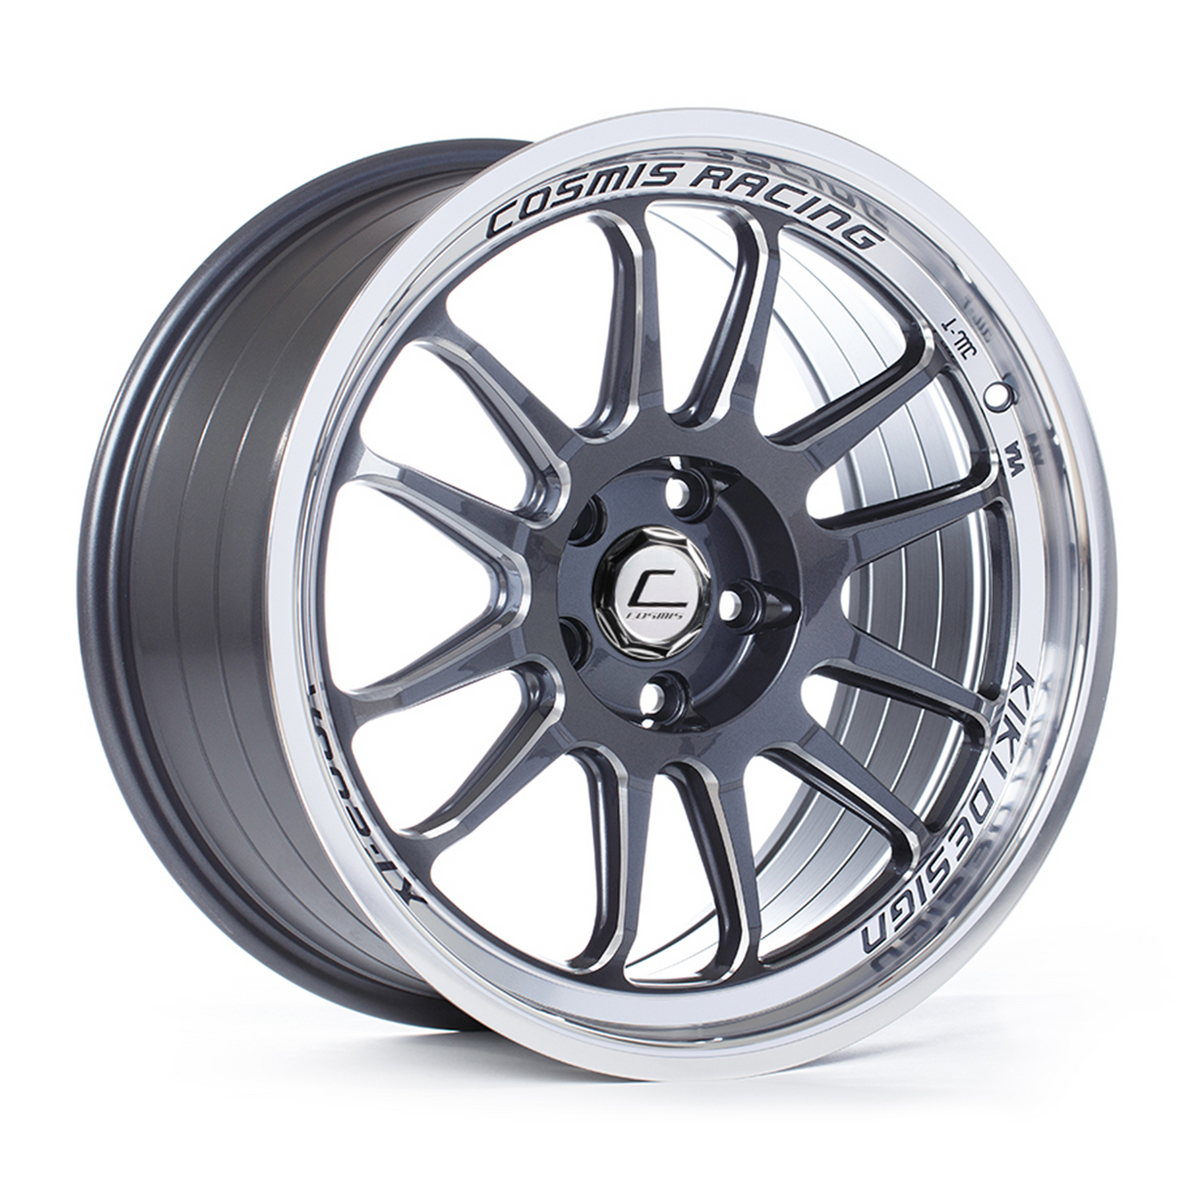 Cosmis Racing Xt206r's, and Continental Extreme Contacts